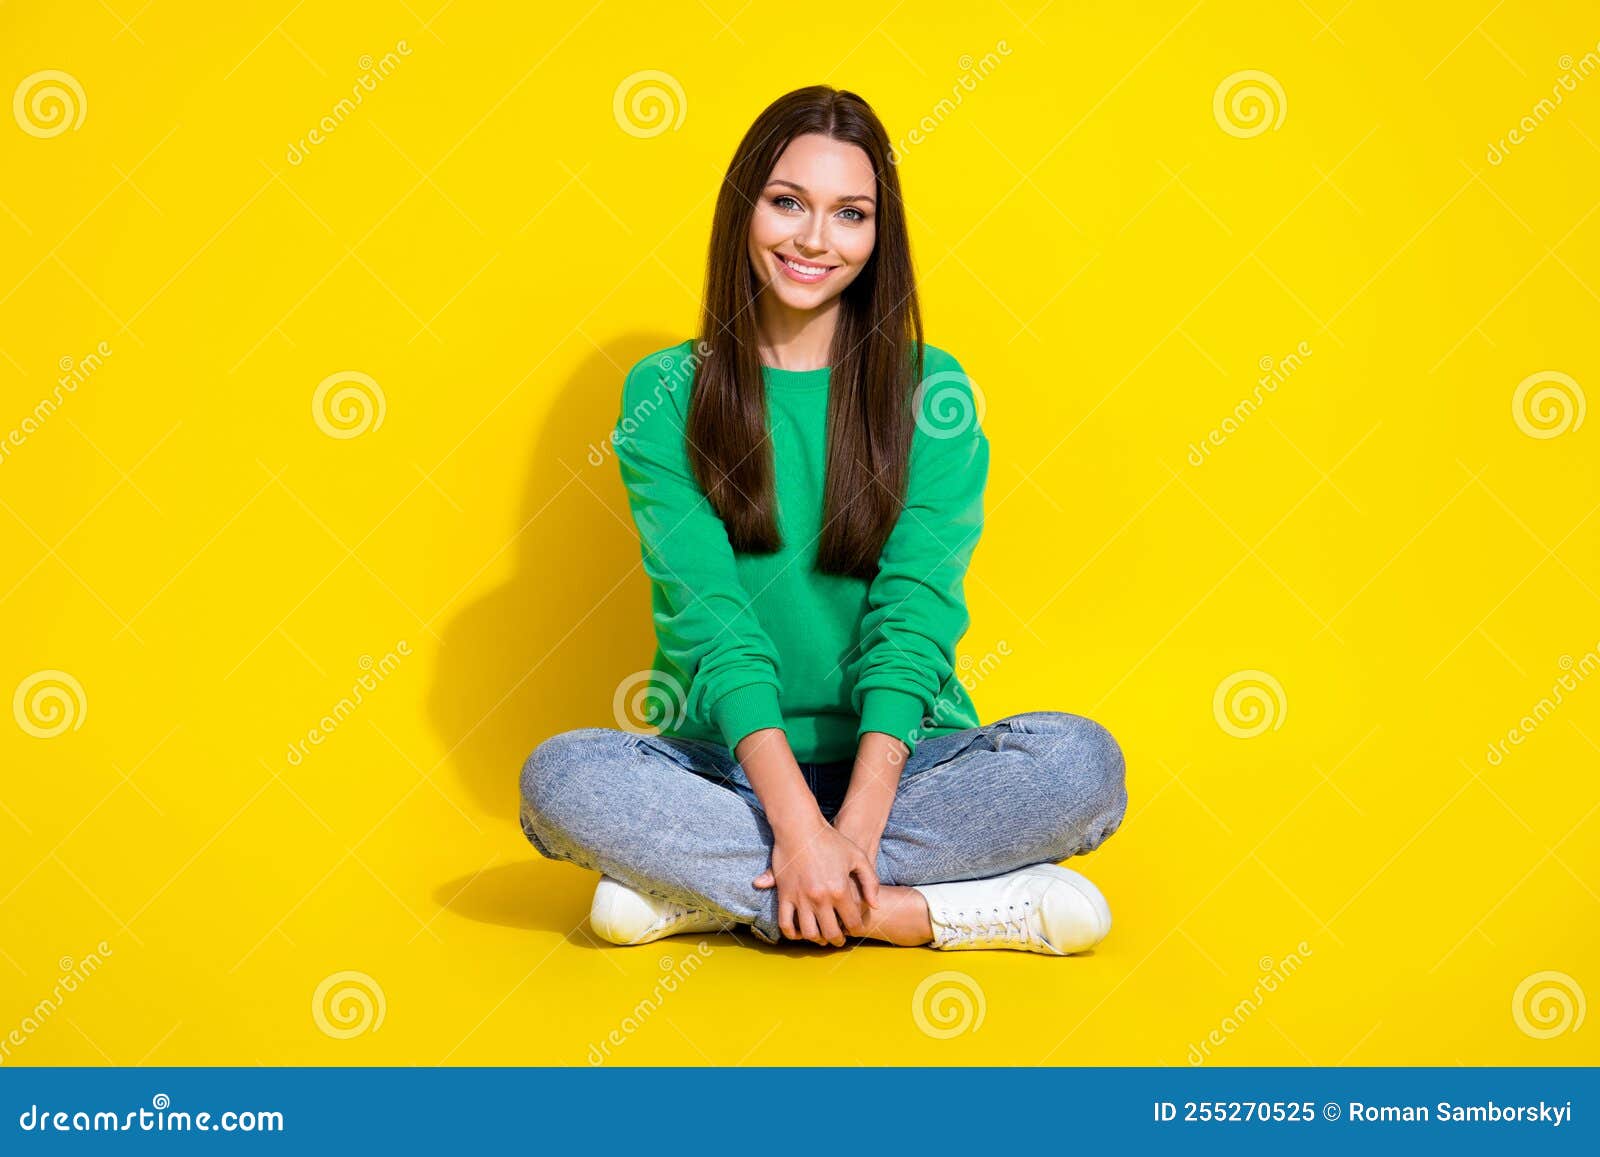 Full Body Photo of Charming Young Girl Sit Floor Crossed Legs Relaxing ...